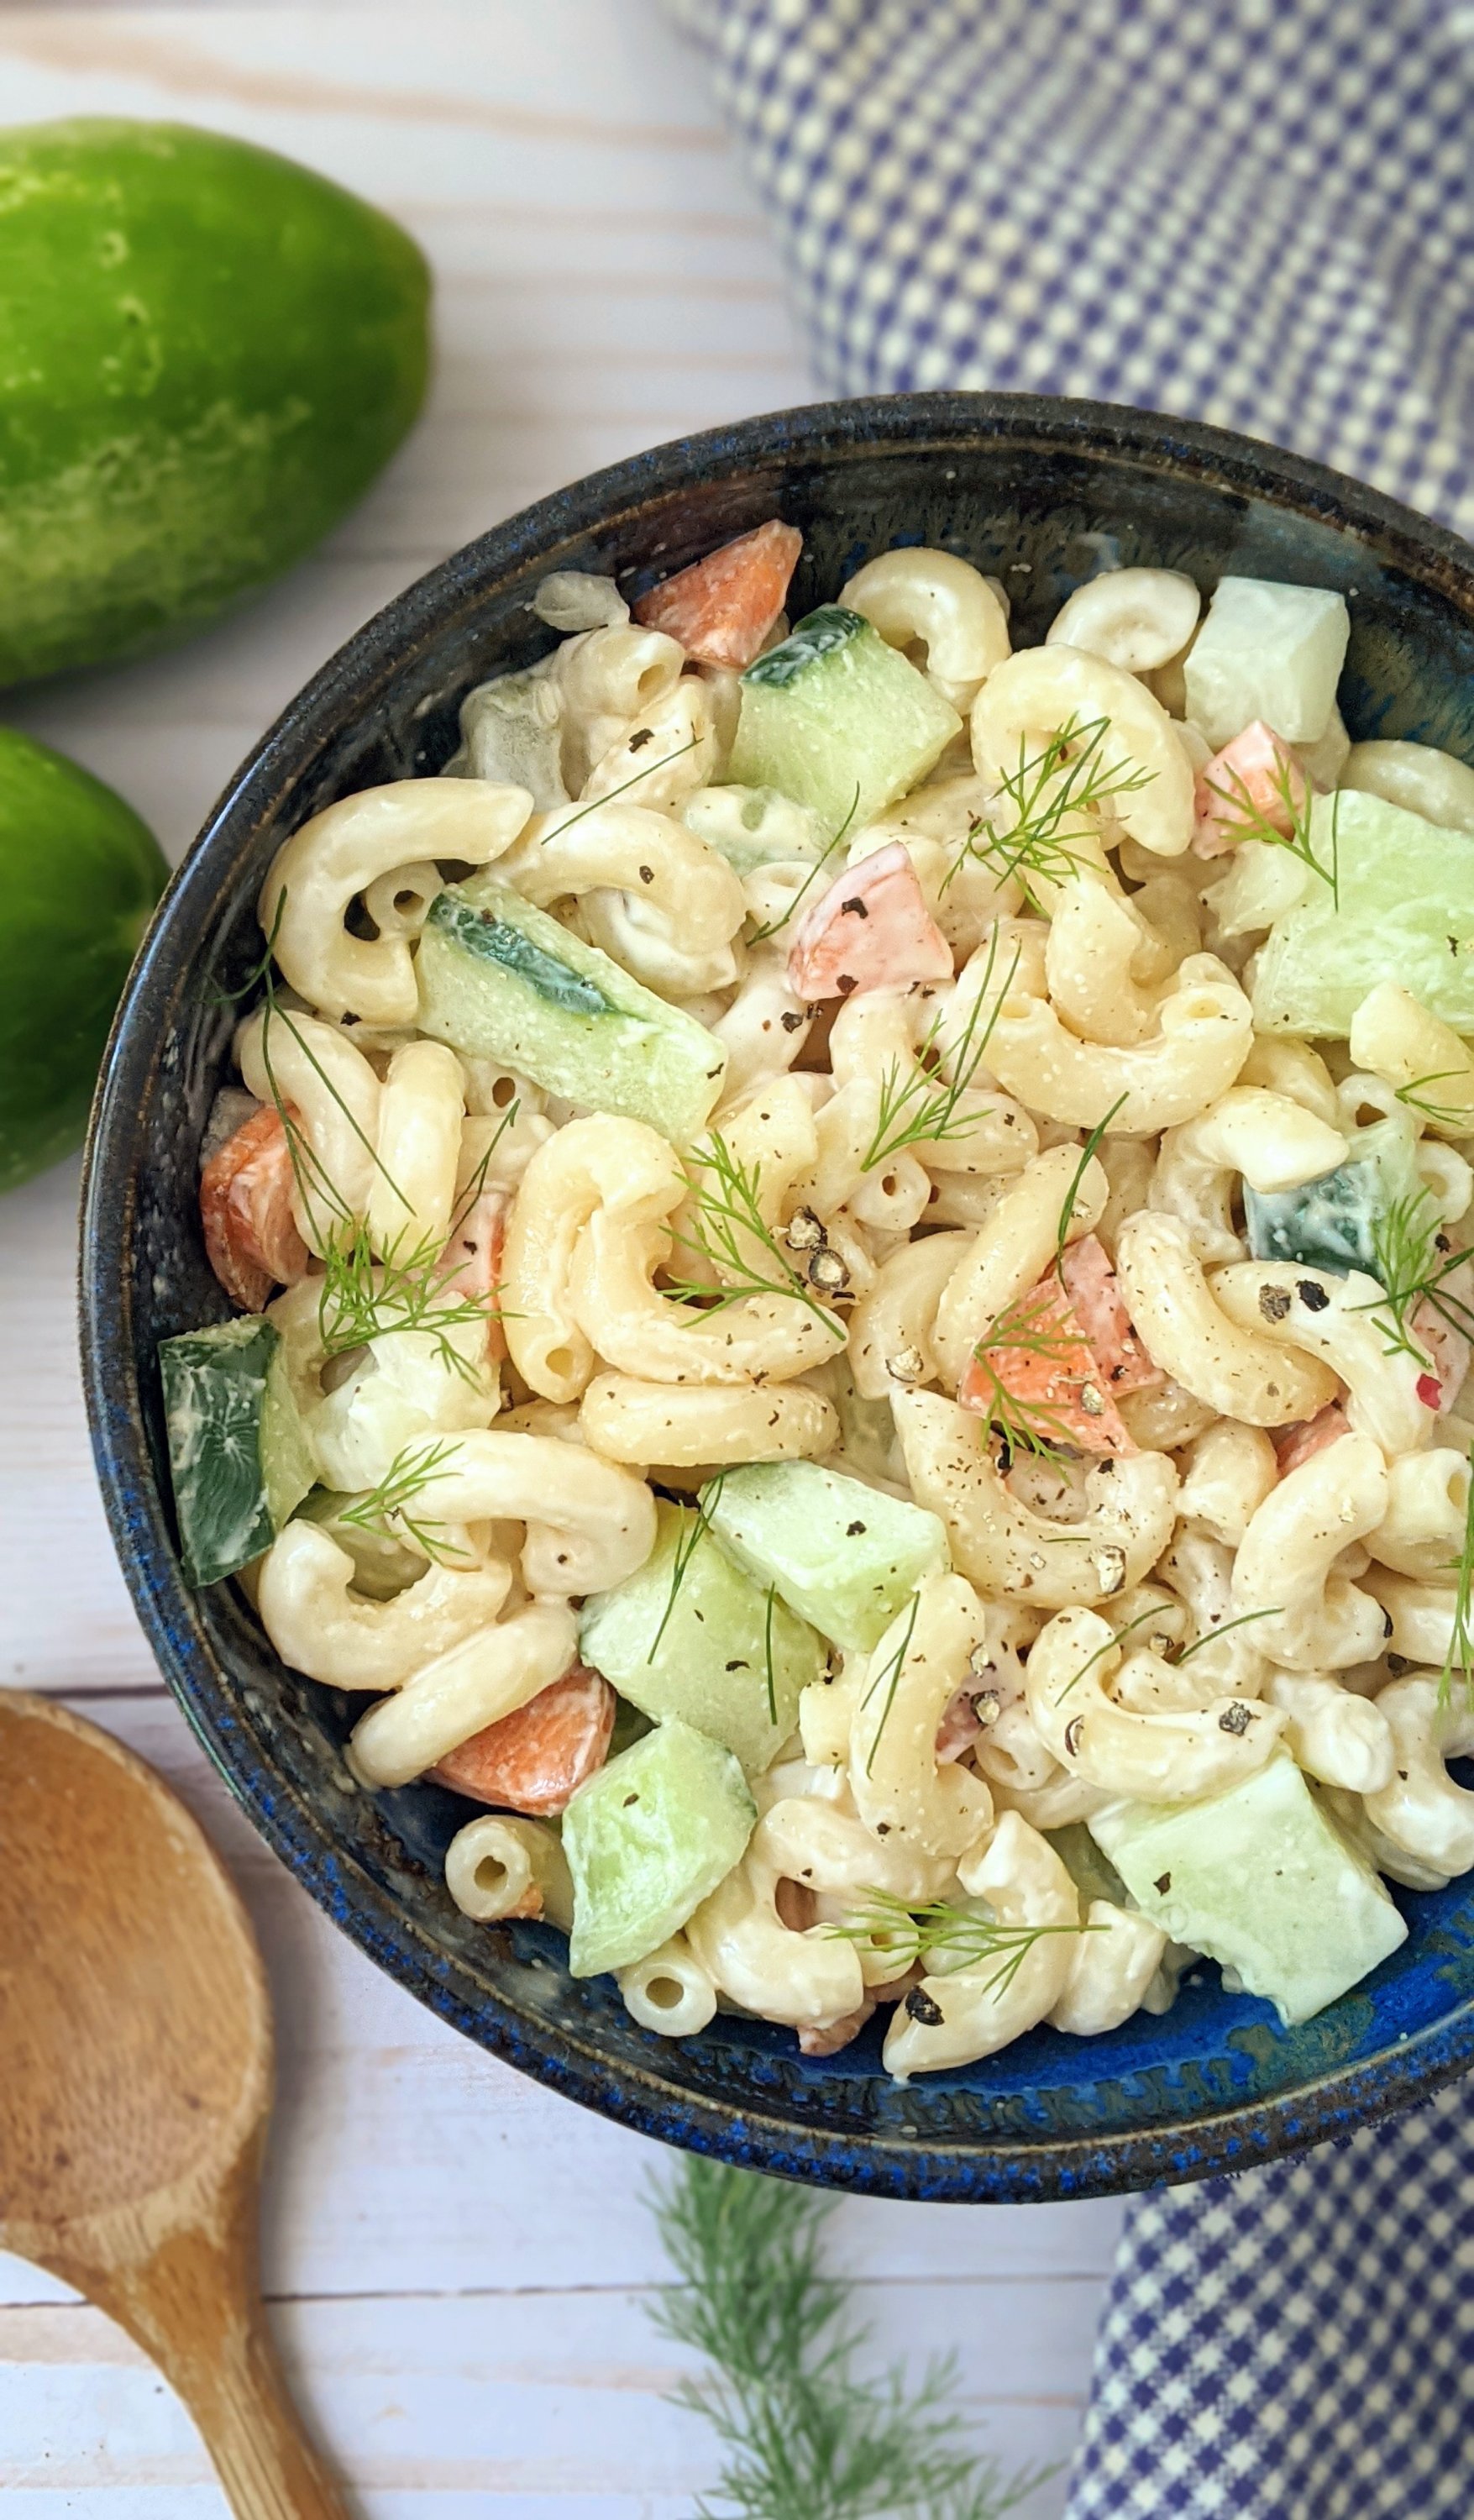 cucumber dill macaroni salad recipe vegan gluten free options with macaroni noodle salad with fresh garden cucumbers and homegrown dill recipes